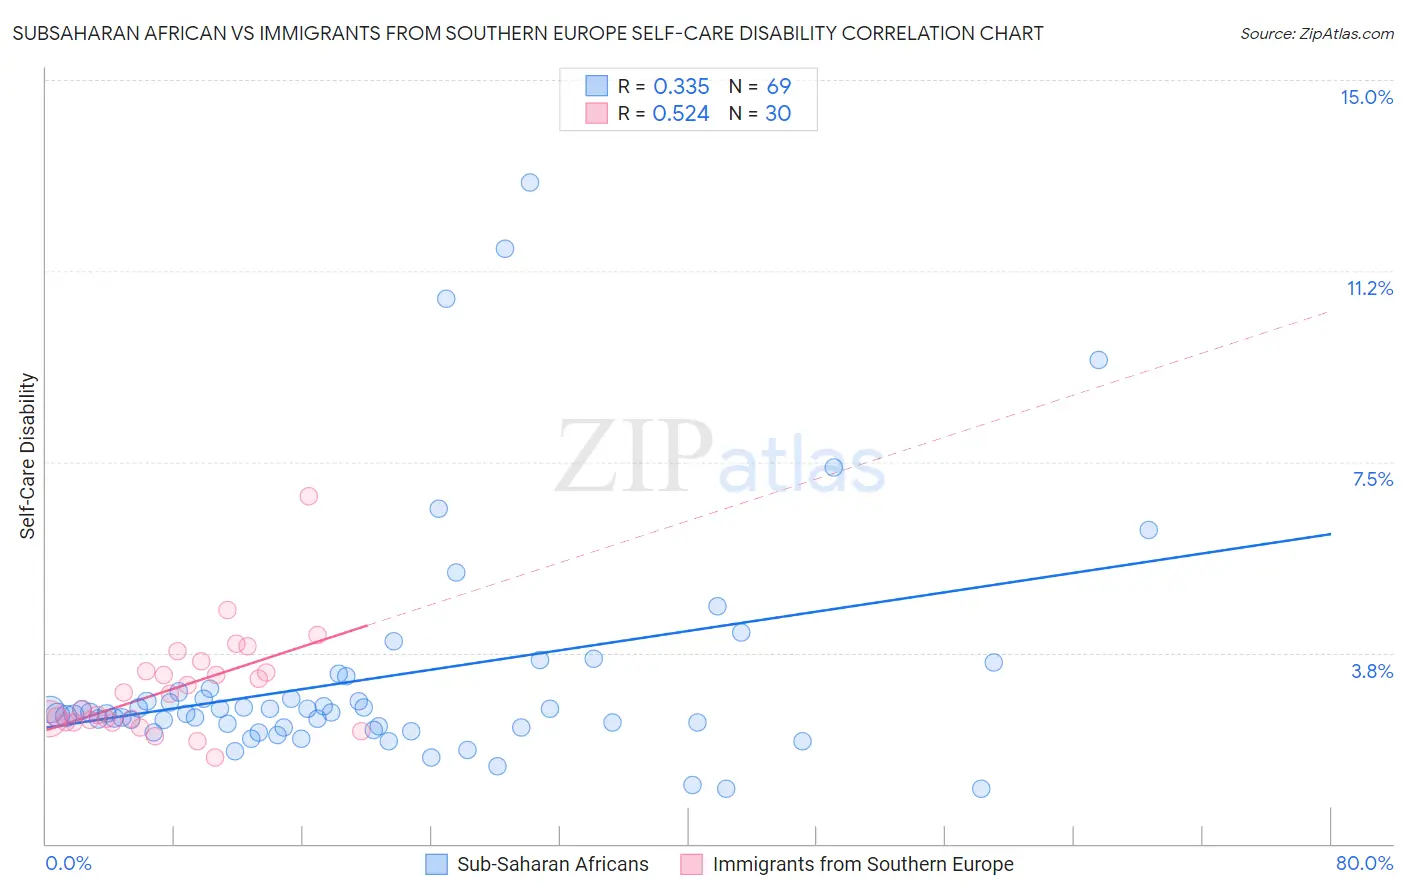 Subsaharan African vs Immigrants from Southern Europe Self-Care Disability